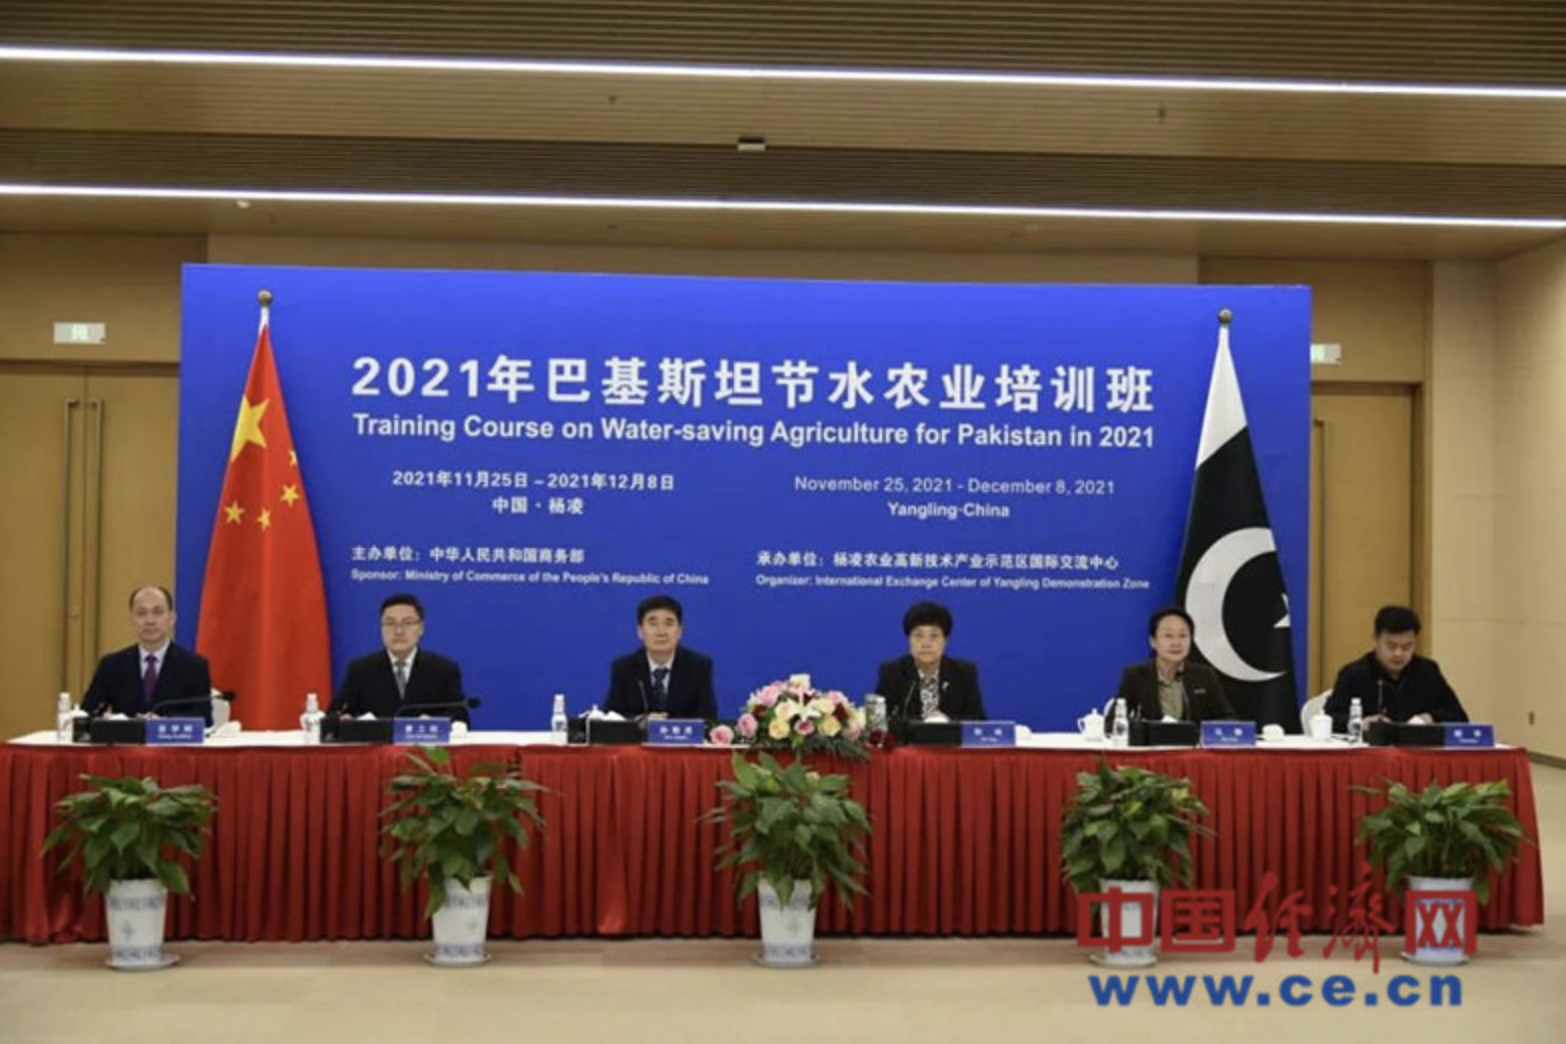 China, Pakistan step up cooperation in water-saving agriculture A 14-day online training course on water-saving agriculture for Pakistan kicks o...